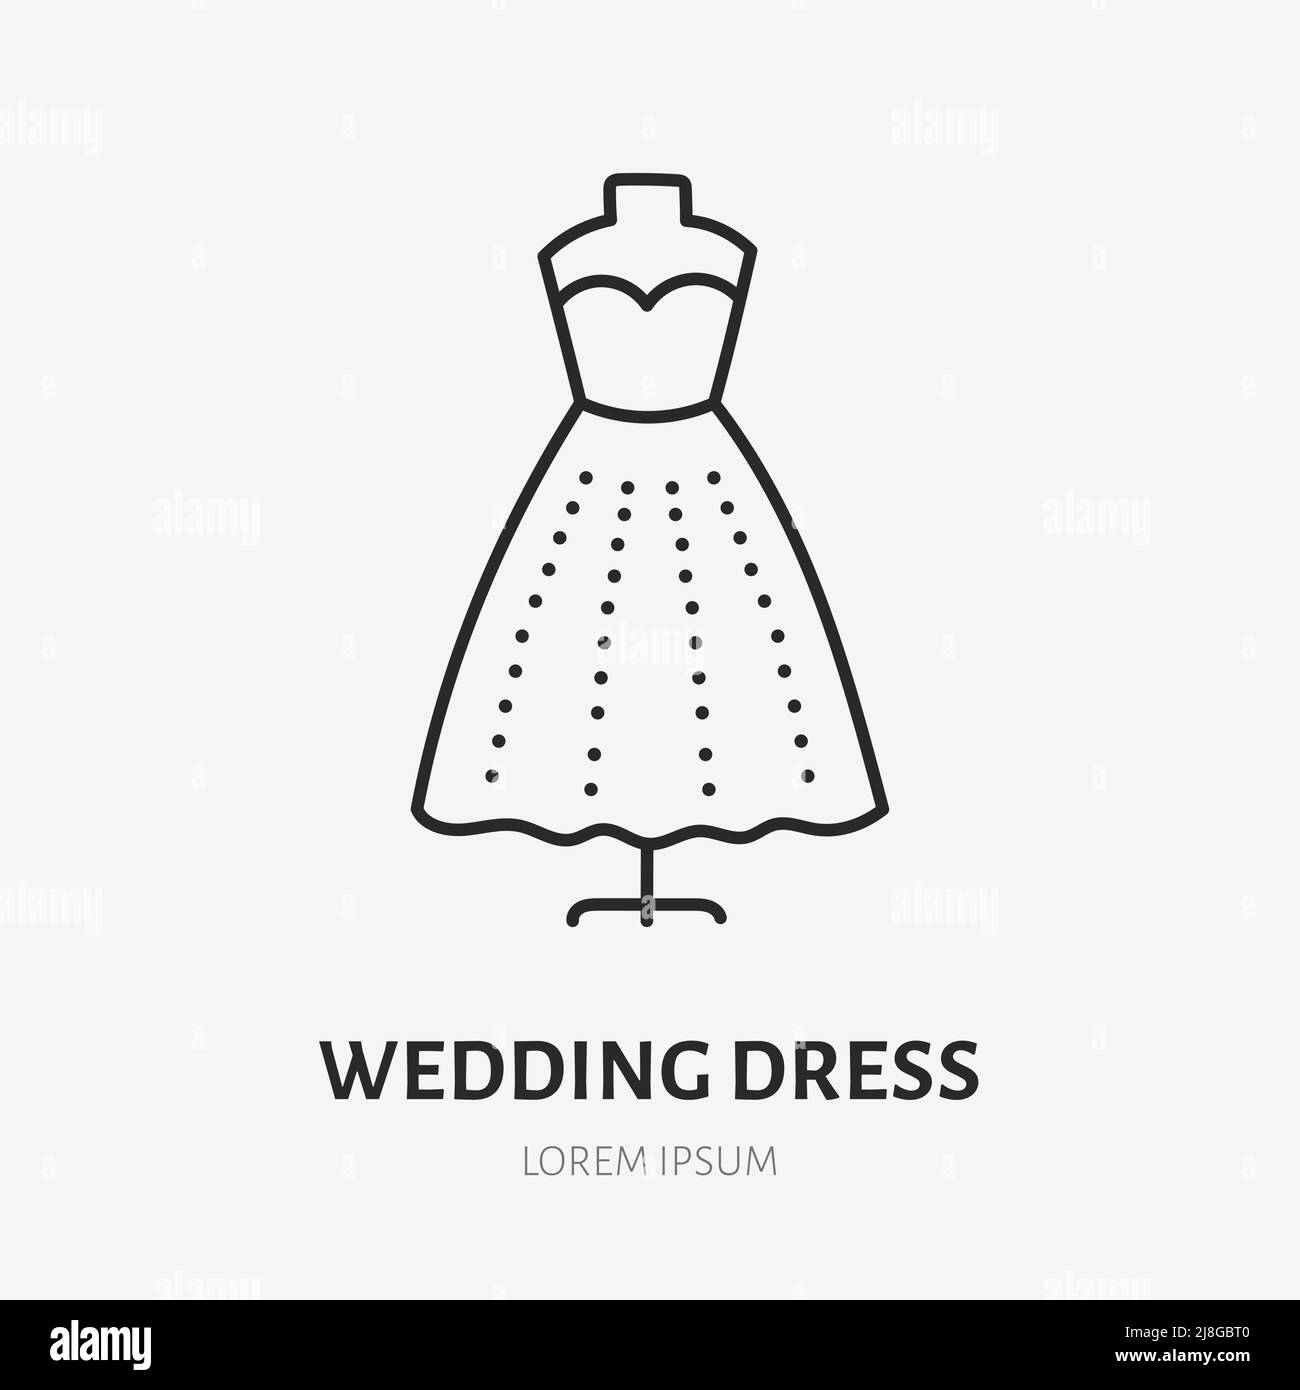 Dress icon Black and White Stock Photos & Images - Alamy